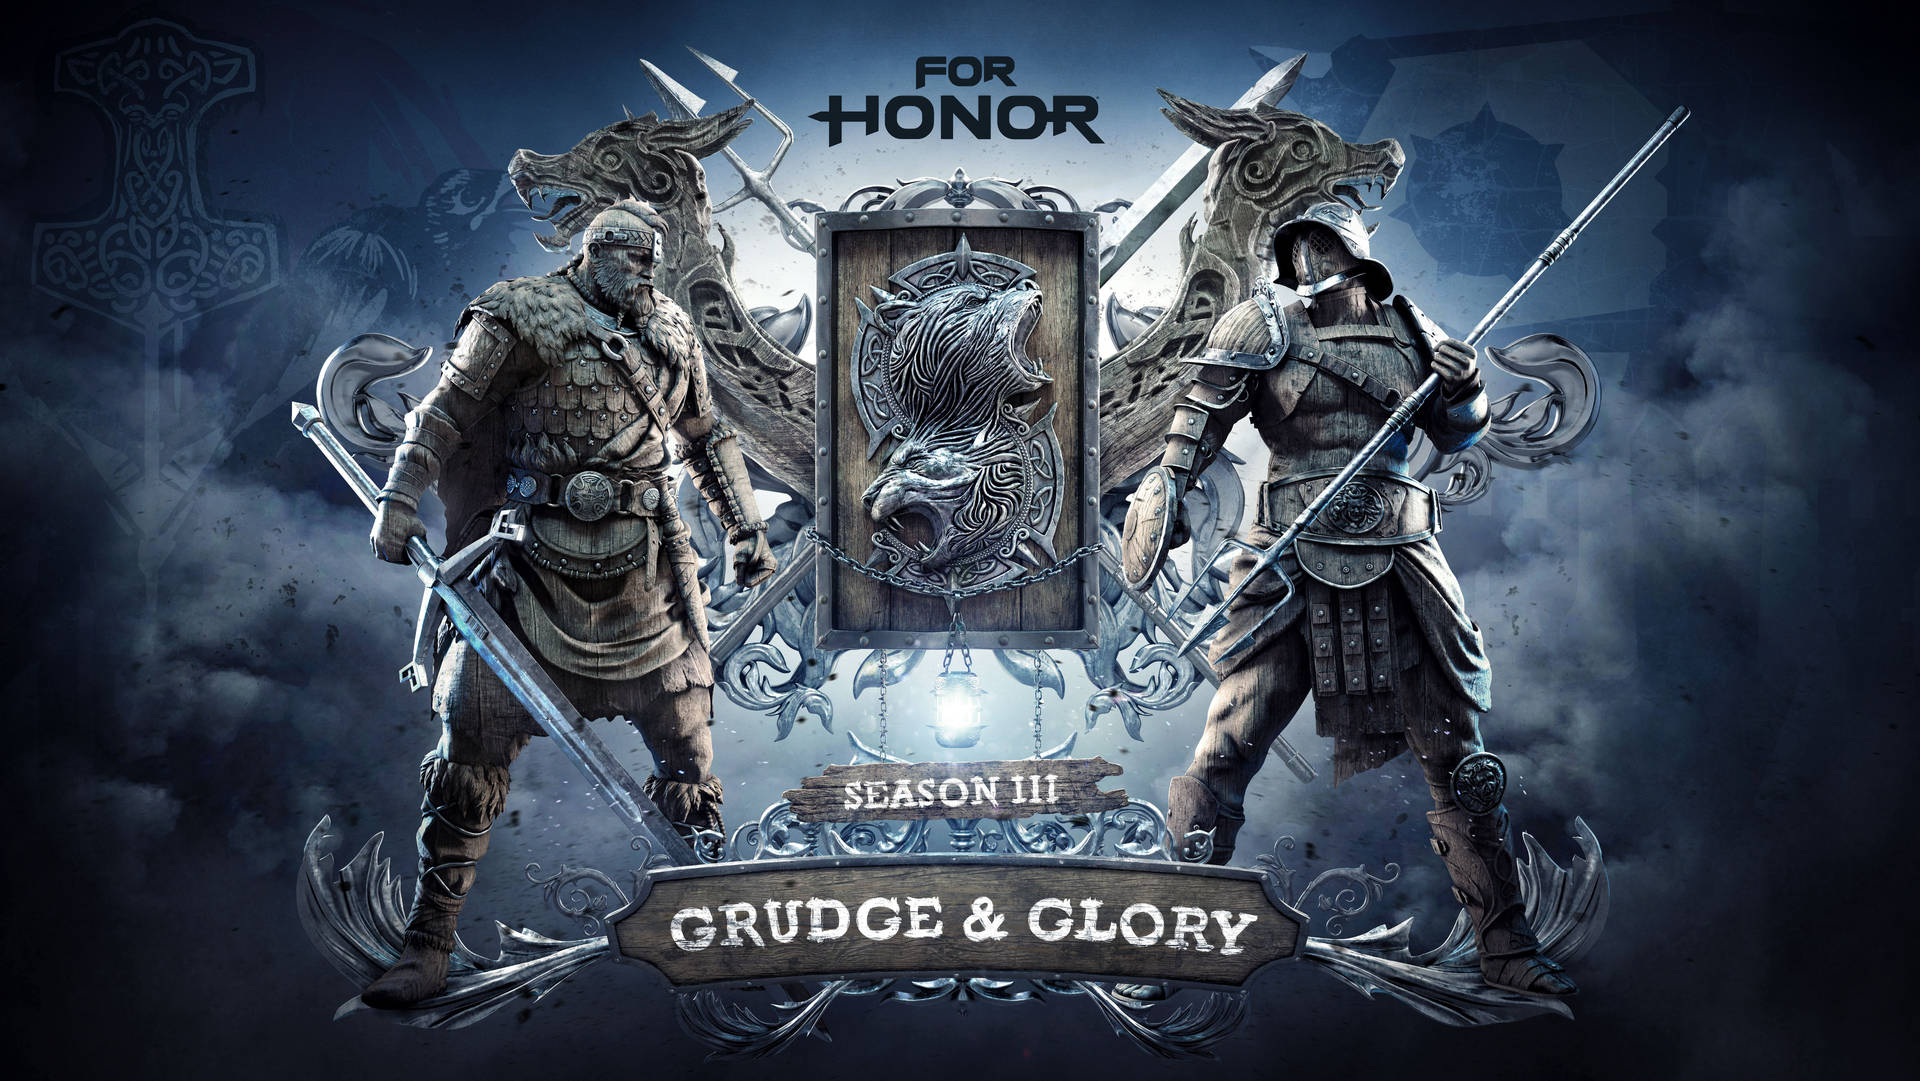 For Honor Grudge And Glory Background